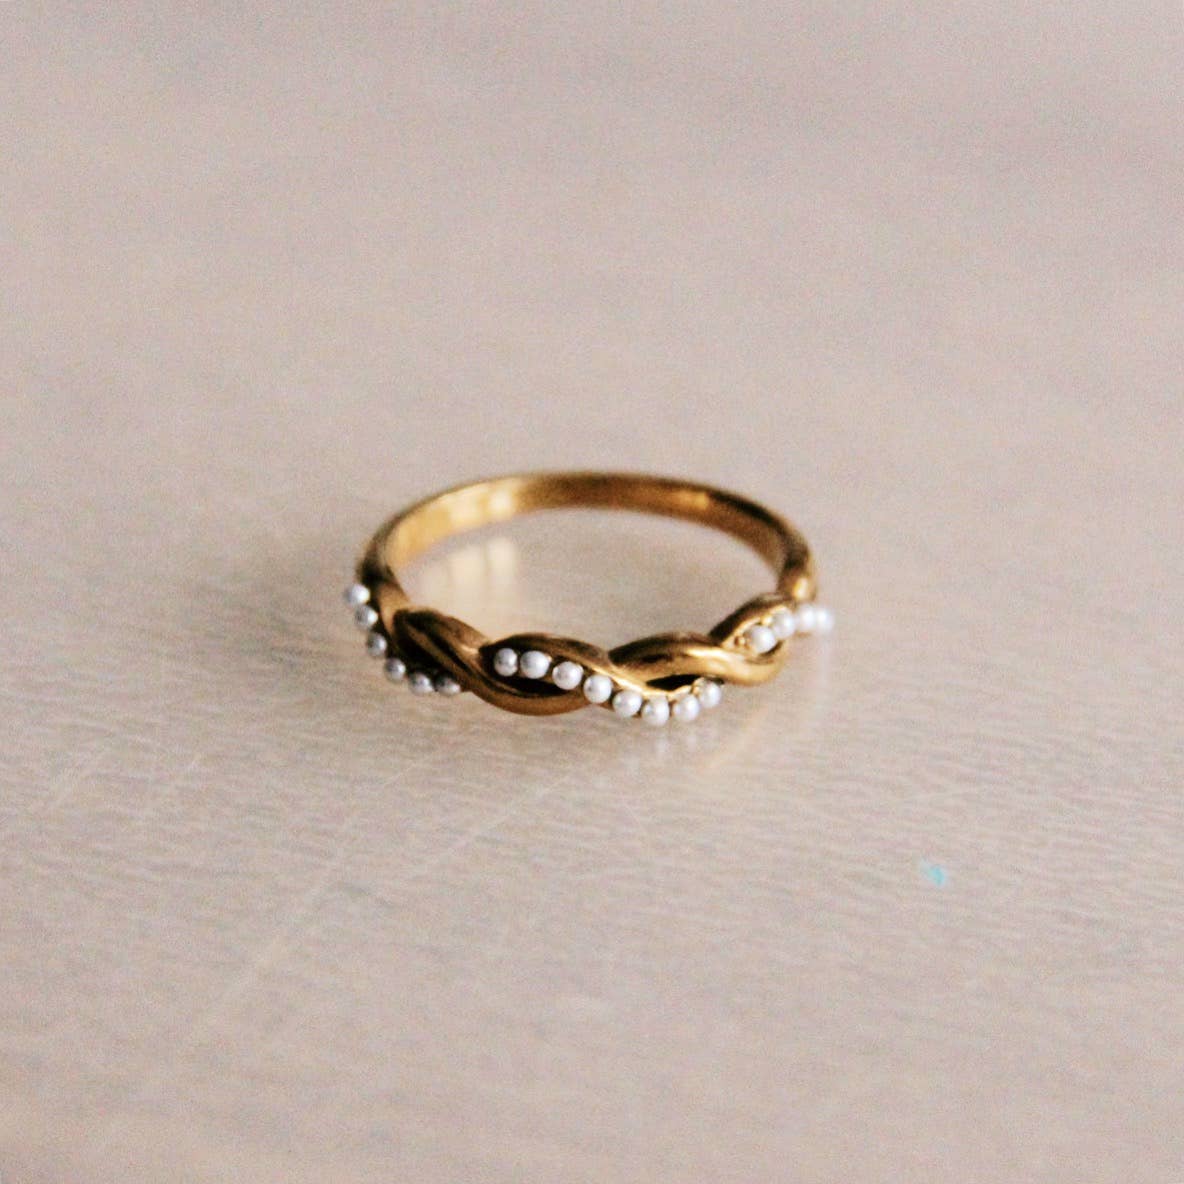 Stainless steel braided ring with pearl rope - gold